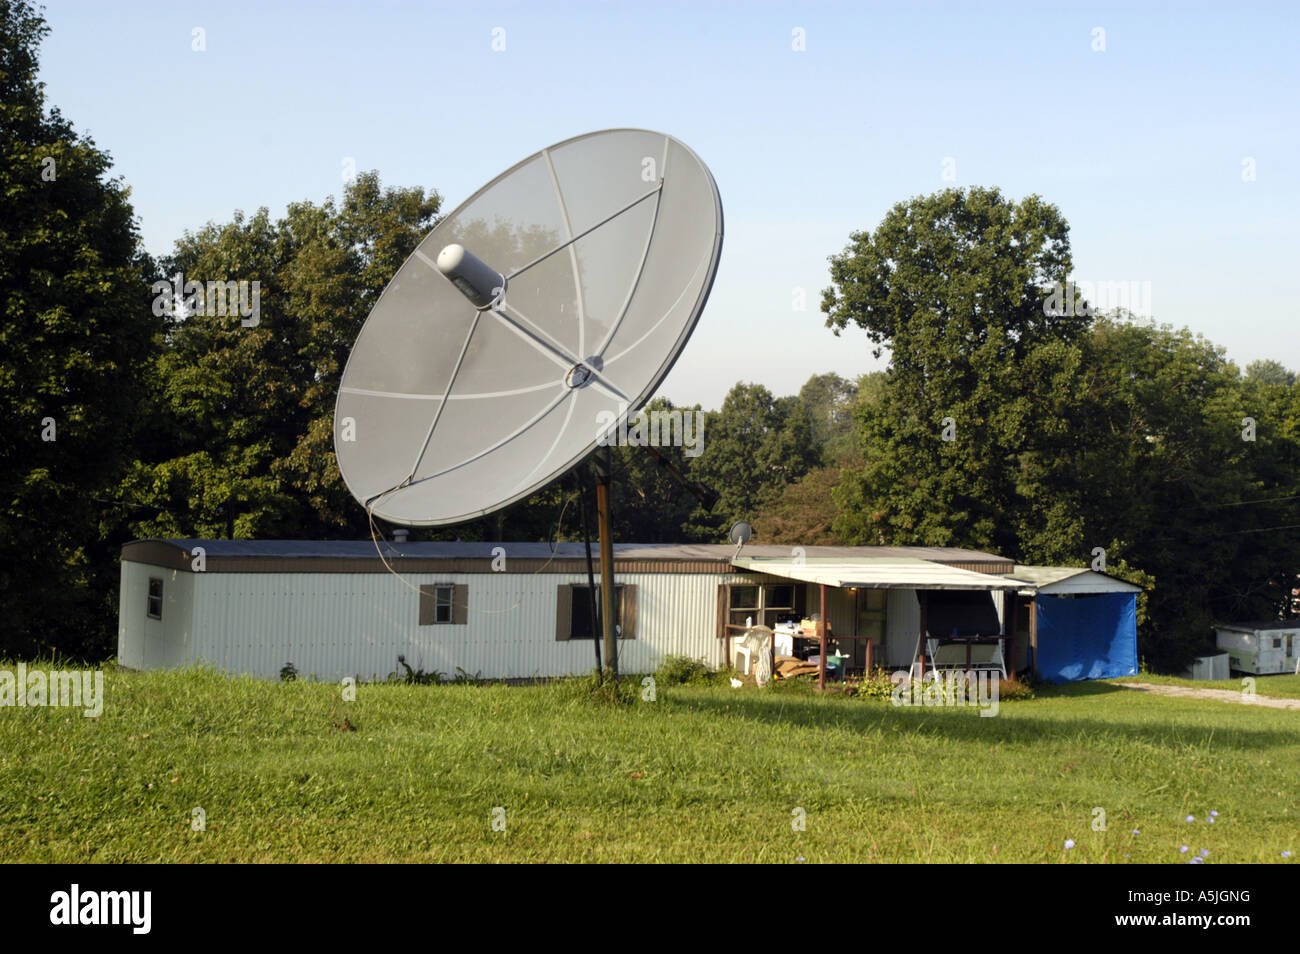 satellite-dish-in-front-of-trailer-A5JGNG.jpg